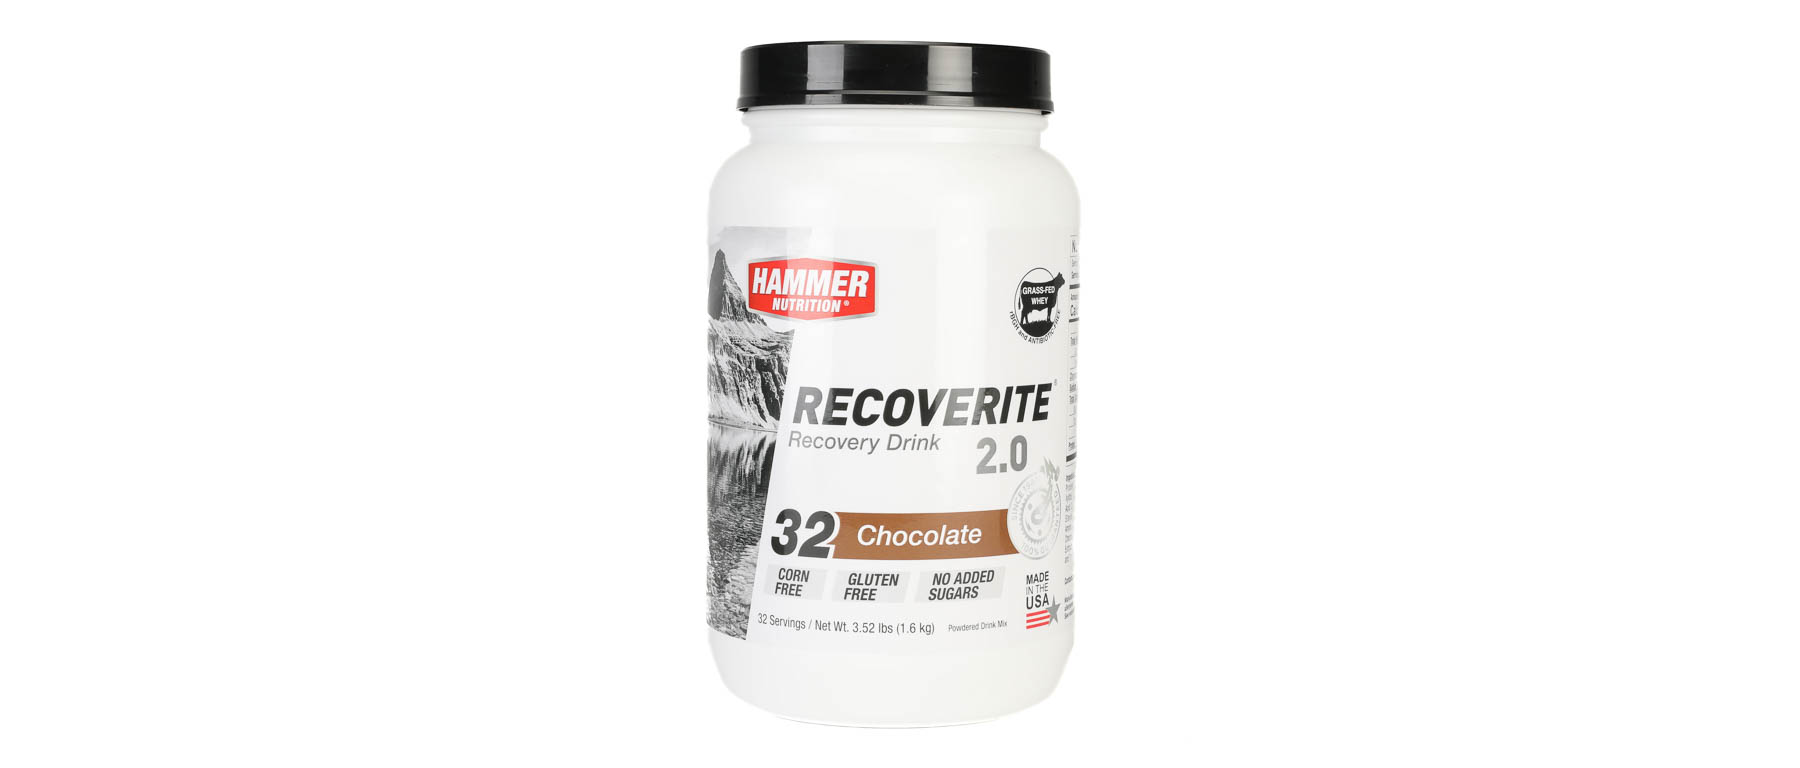 Hammer Recoverite 2.0 Drink Mix